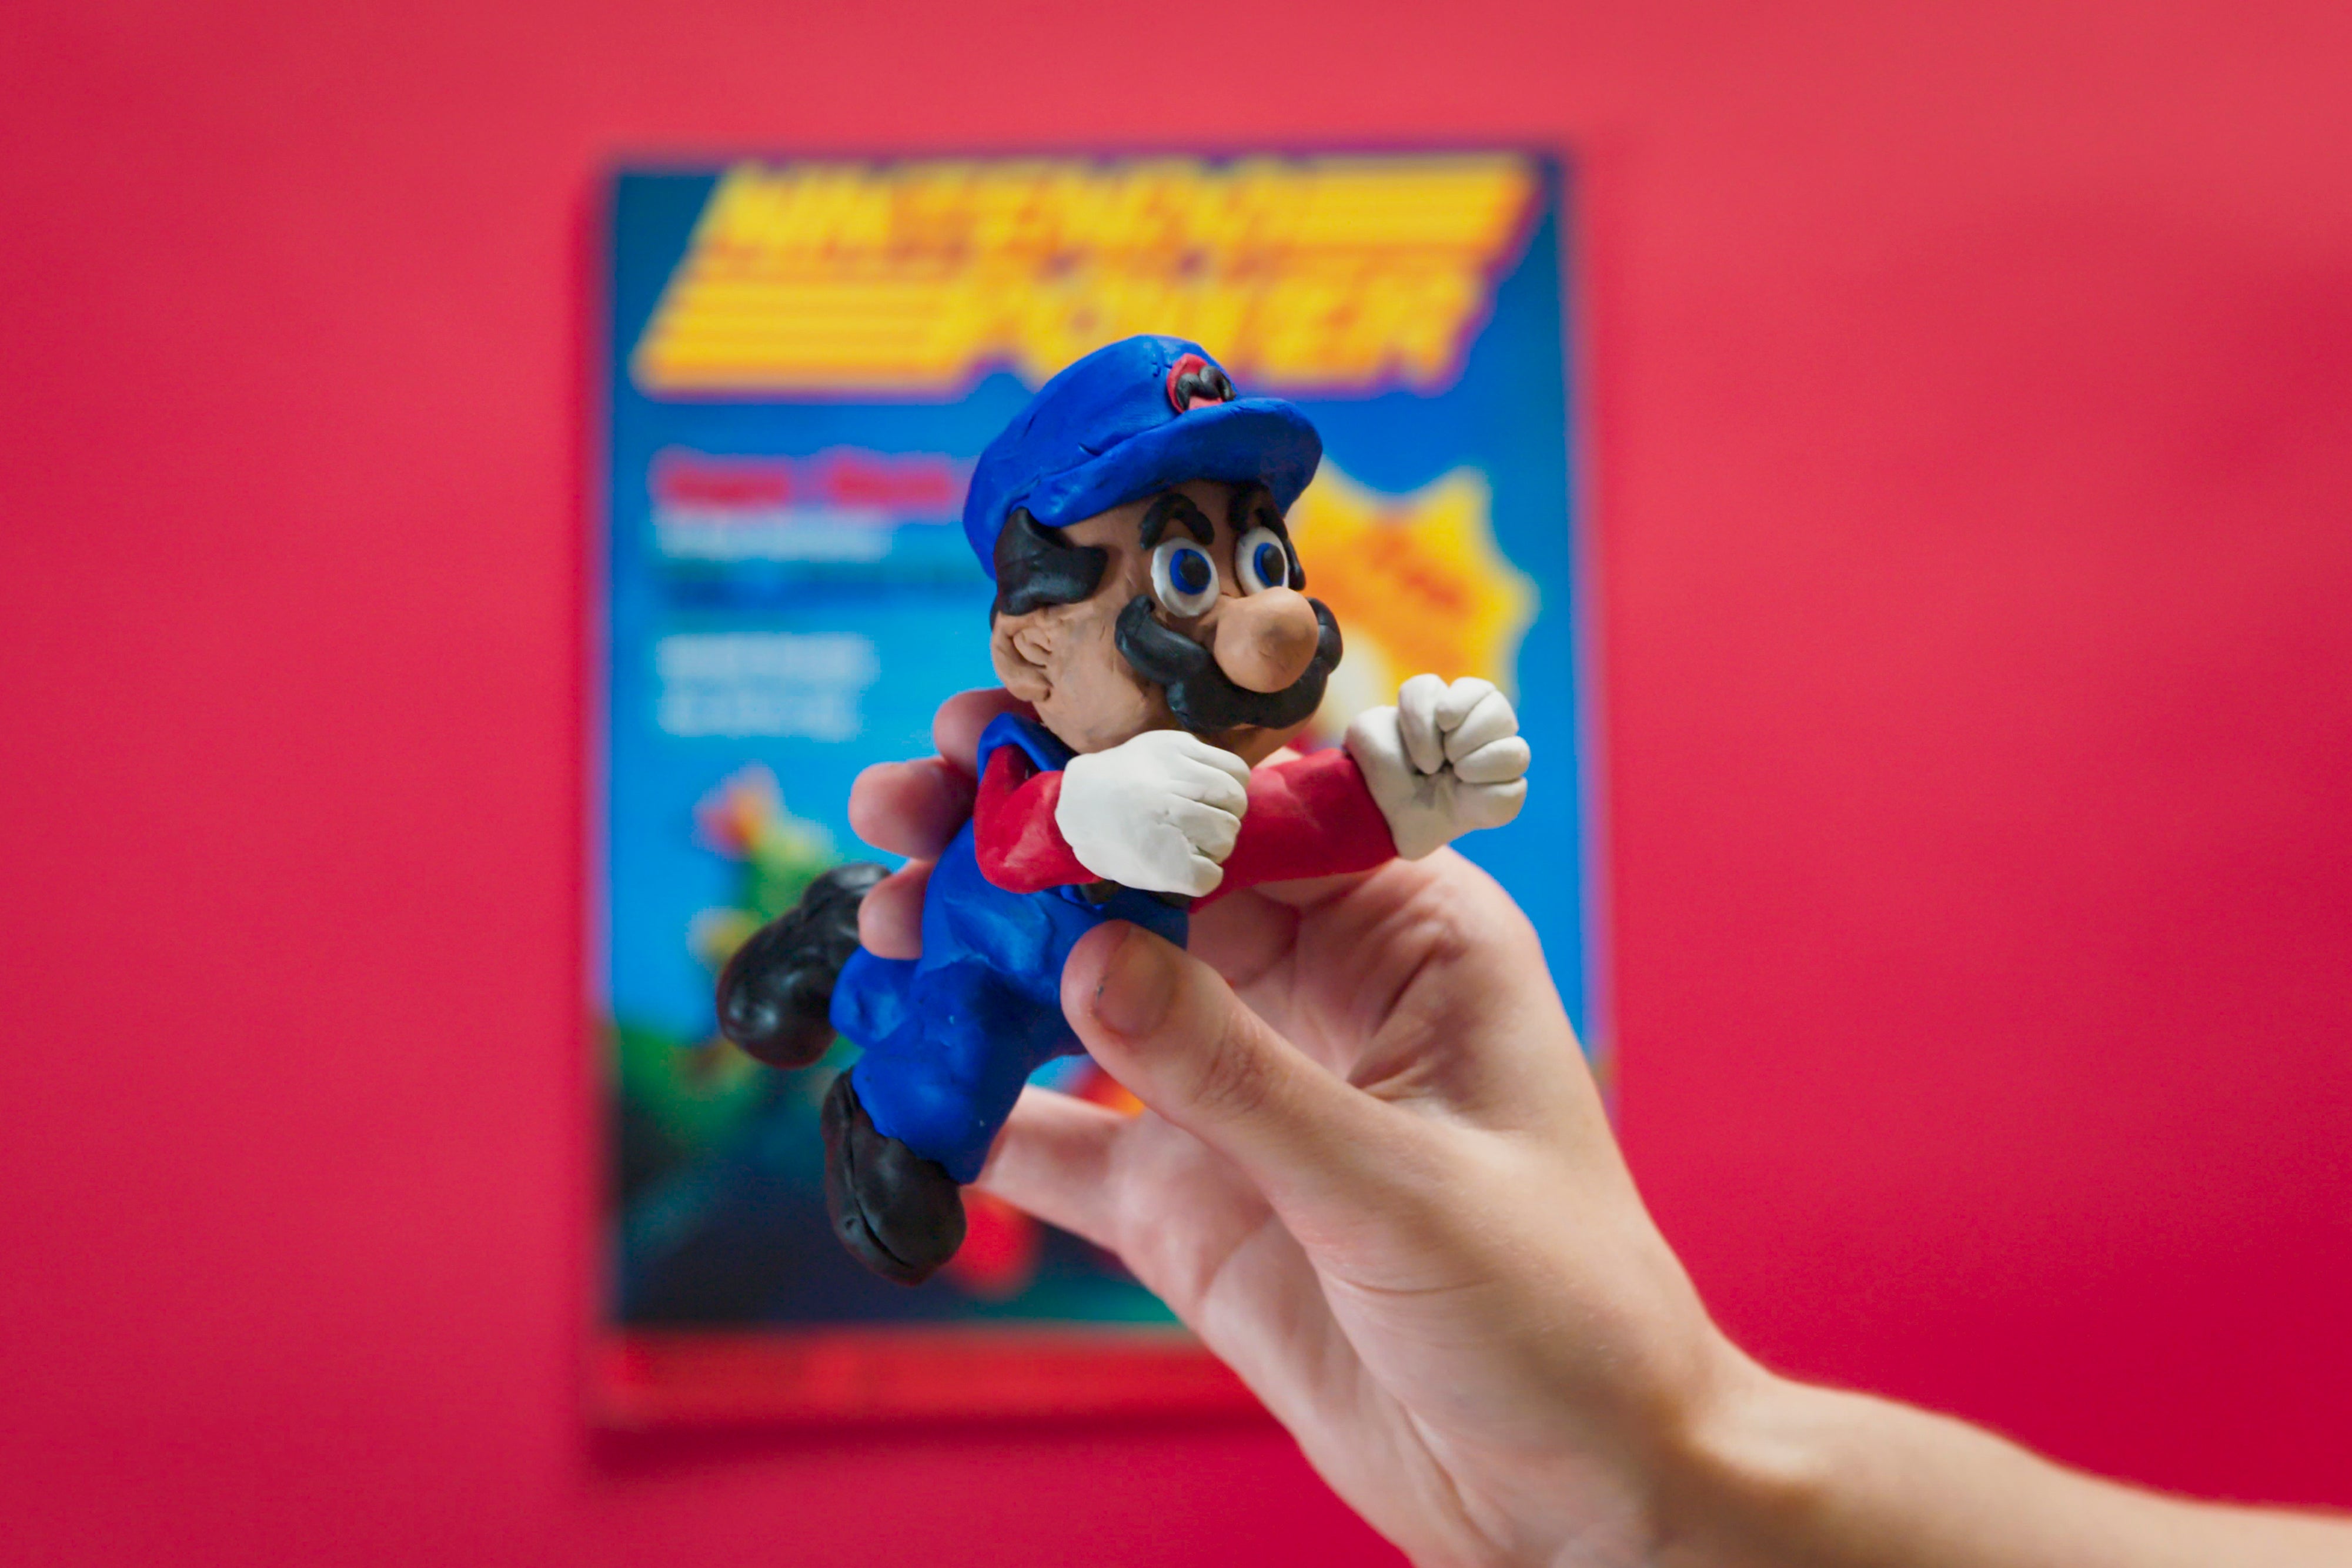 A Mario figurine in front of an old copy of Nintendo Power